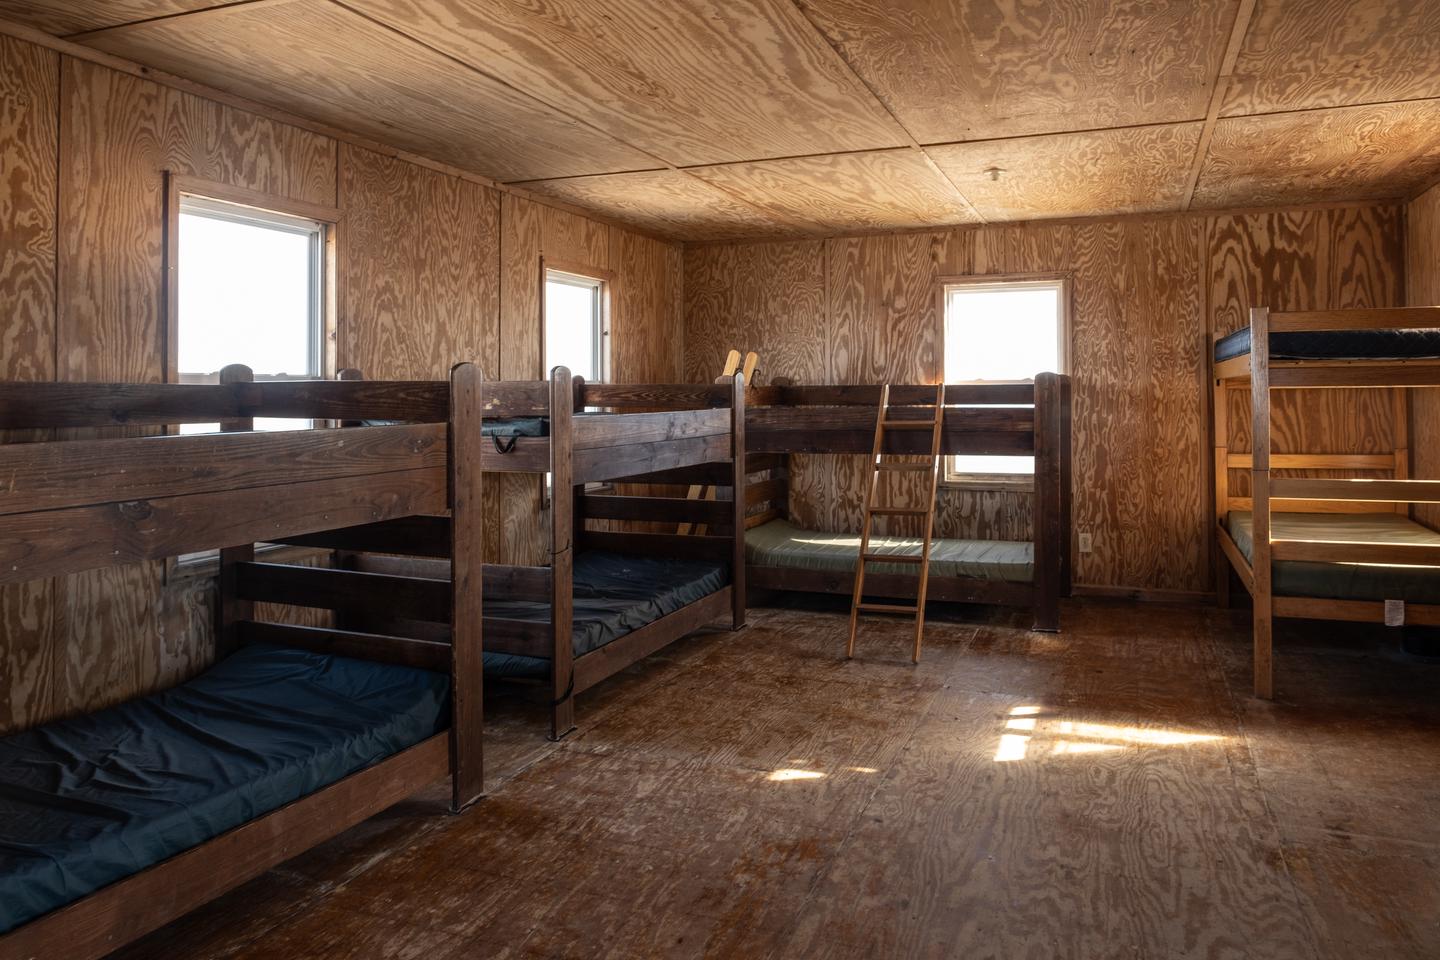 A view of the living room / bedroom area showing 4 bunk beds.Bedroom area with 4 bunk beds.